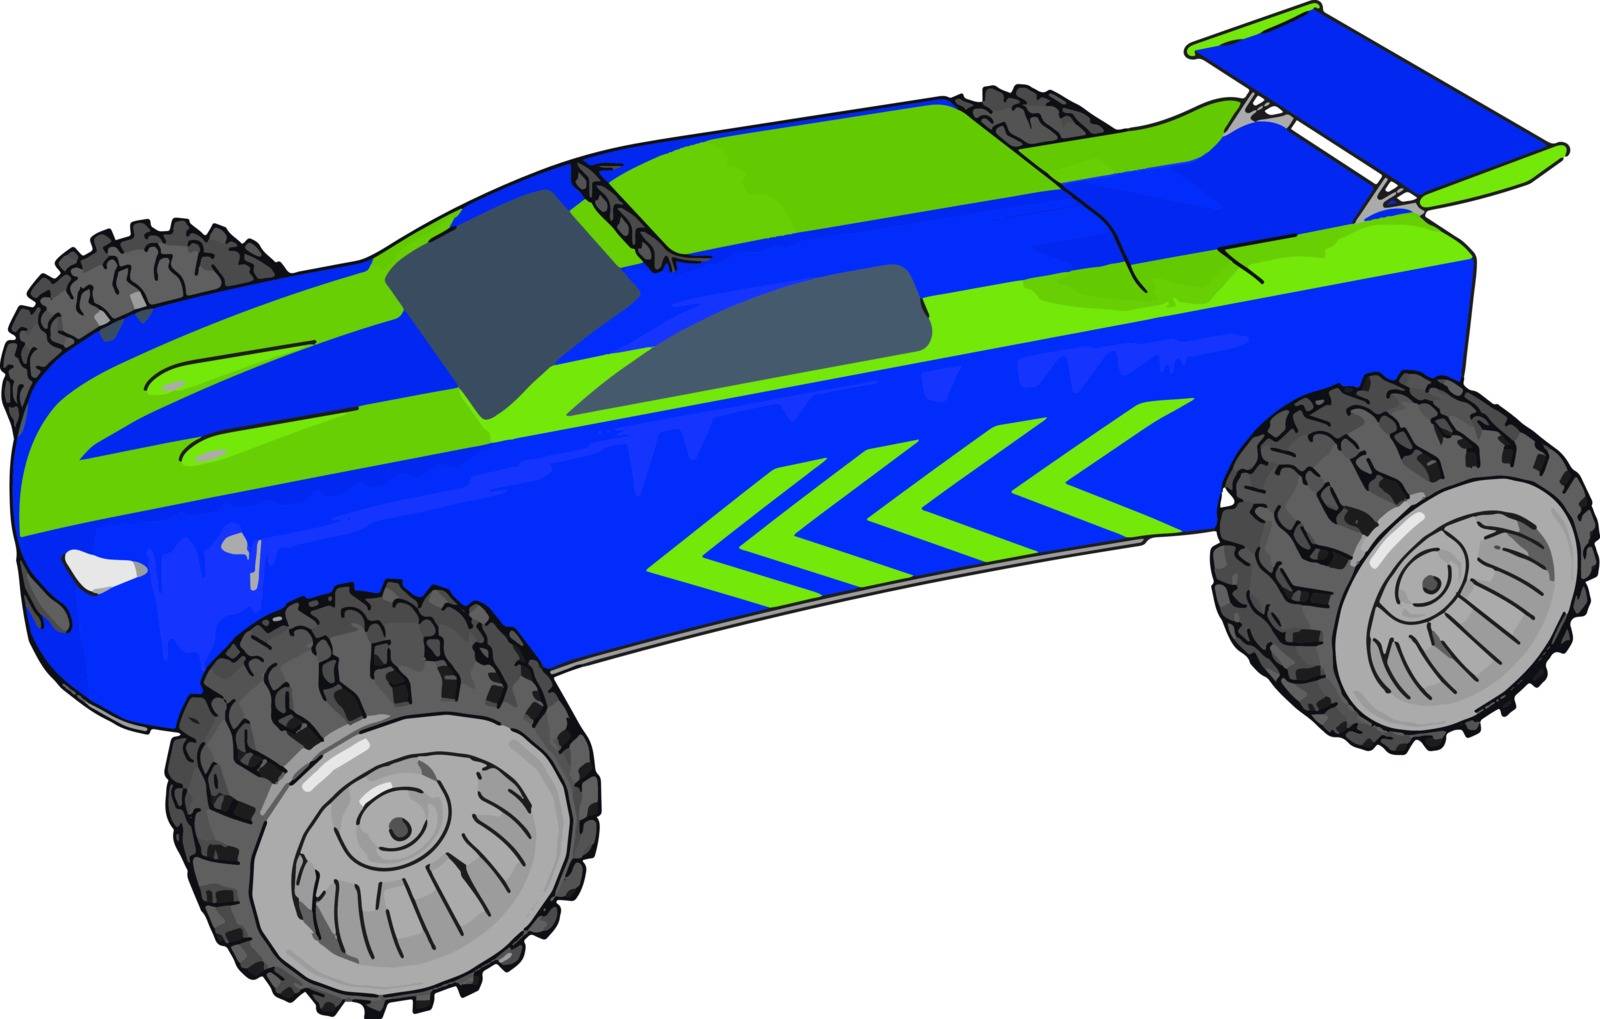 There is no precise difference between a model car and a toy car vector color drawing or illustration